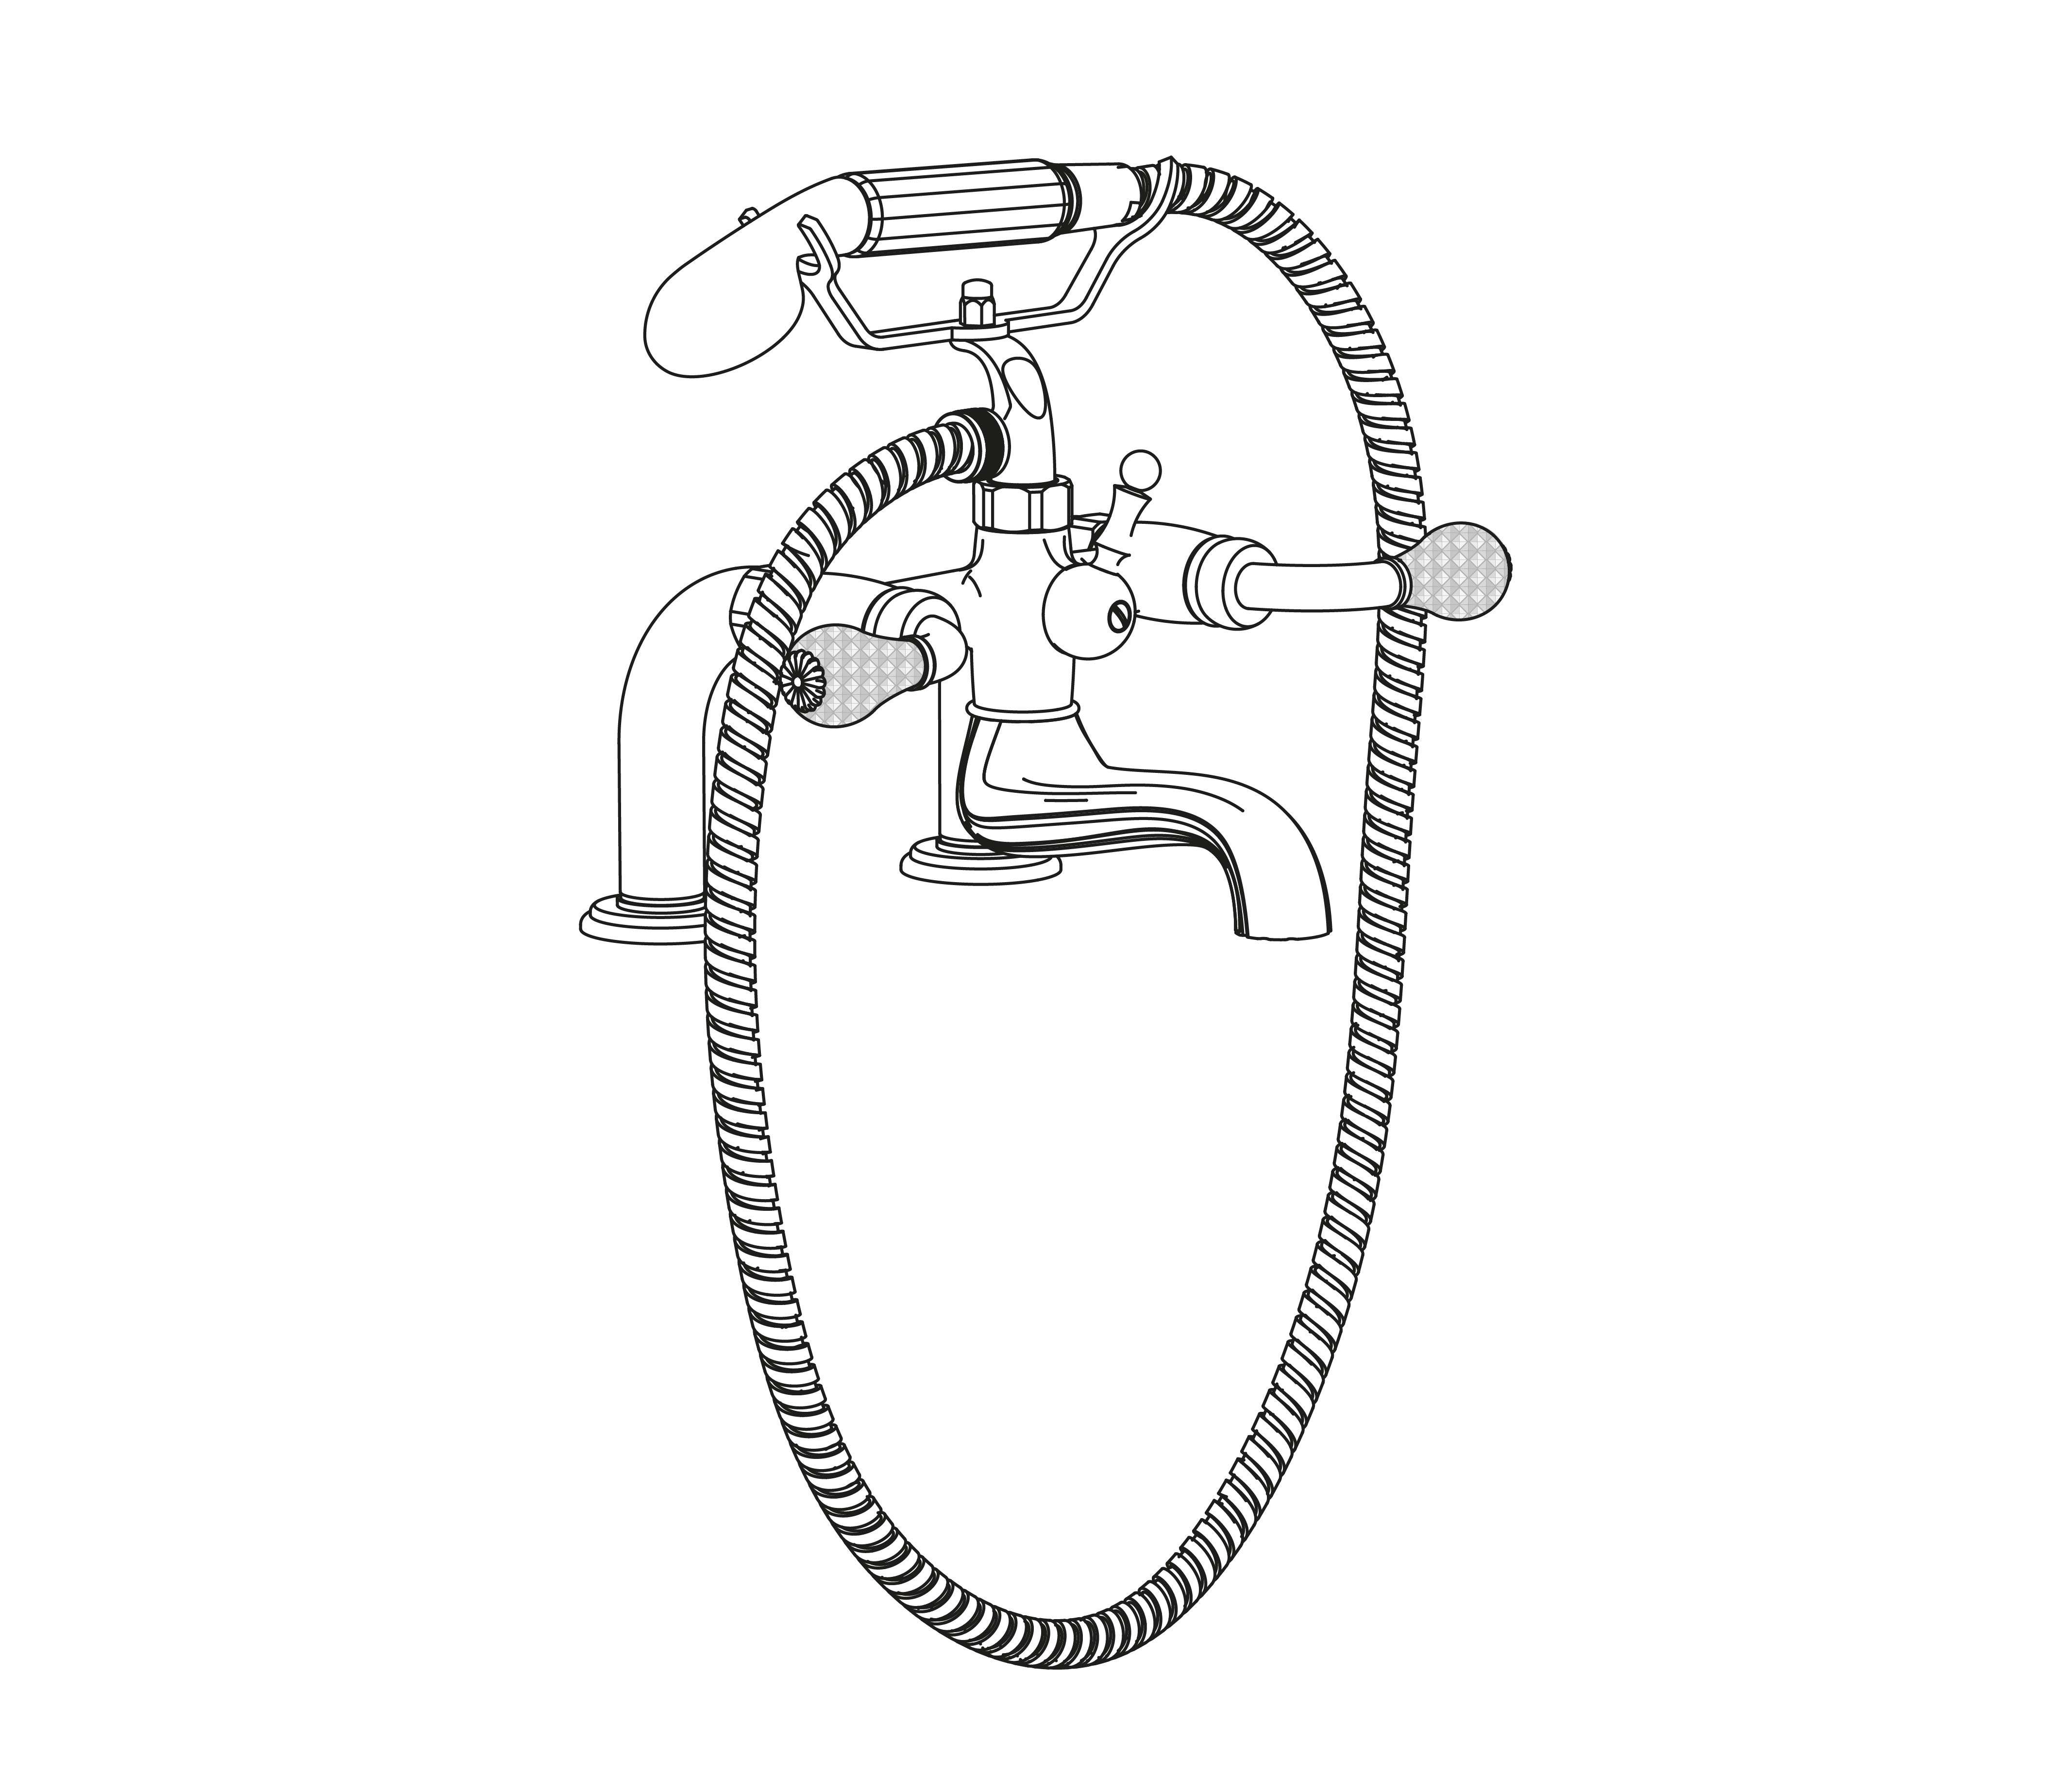 C56-3306 Rim mounted bath and shower mixer